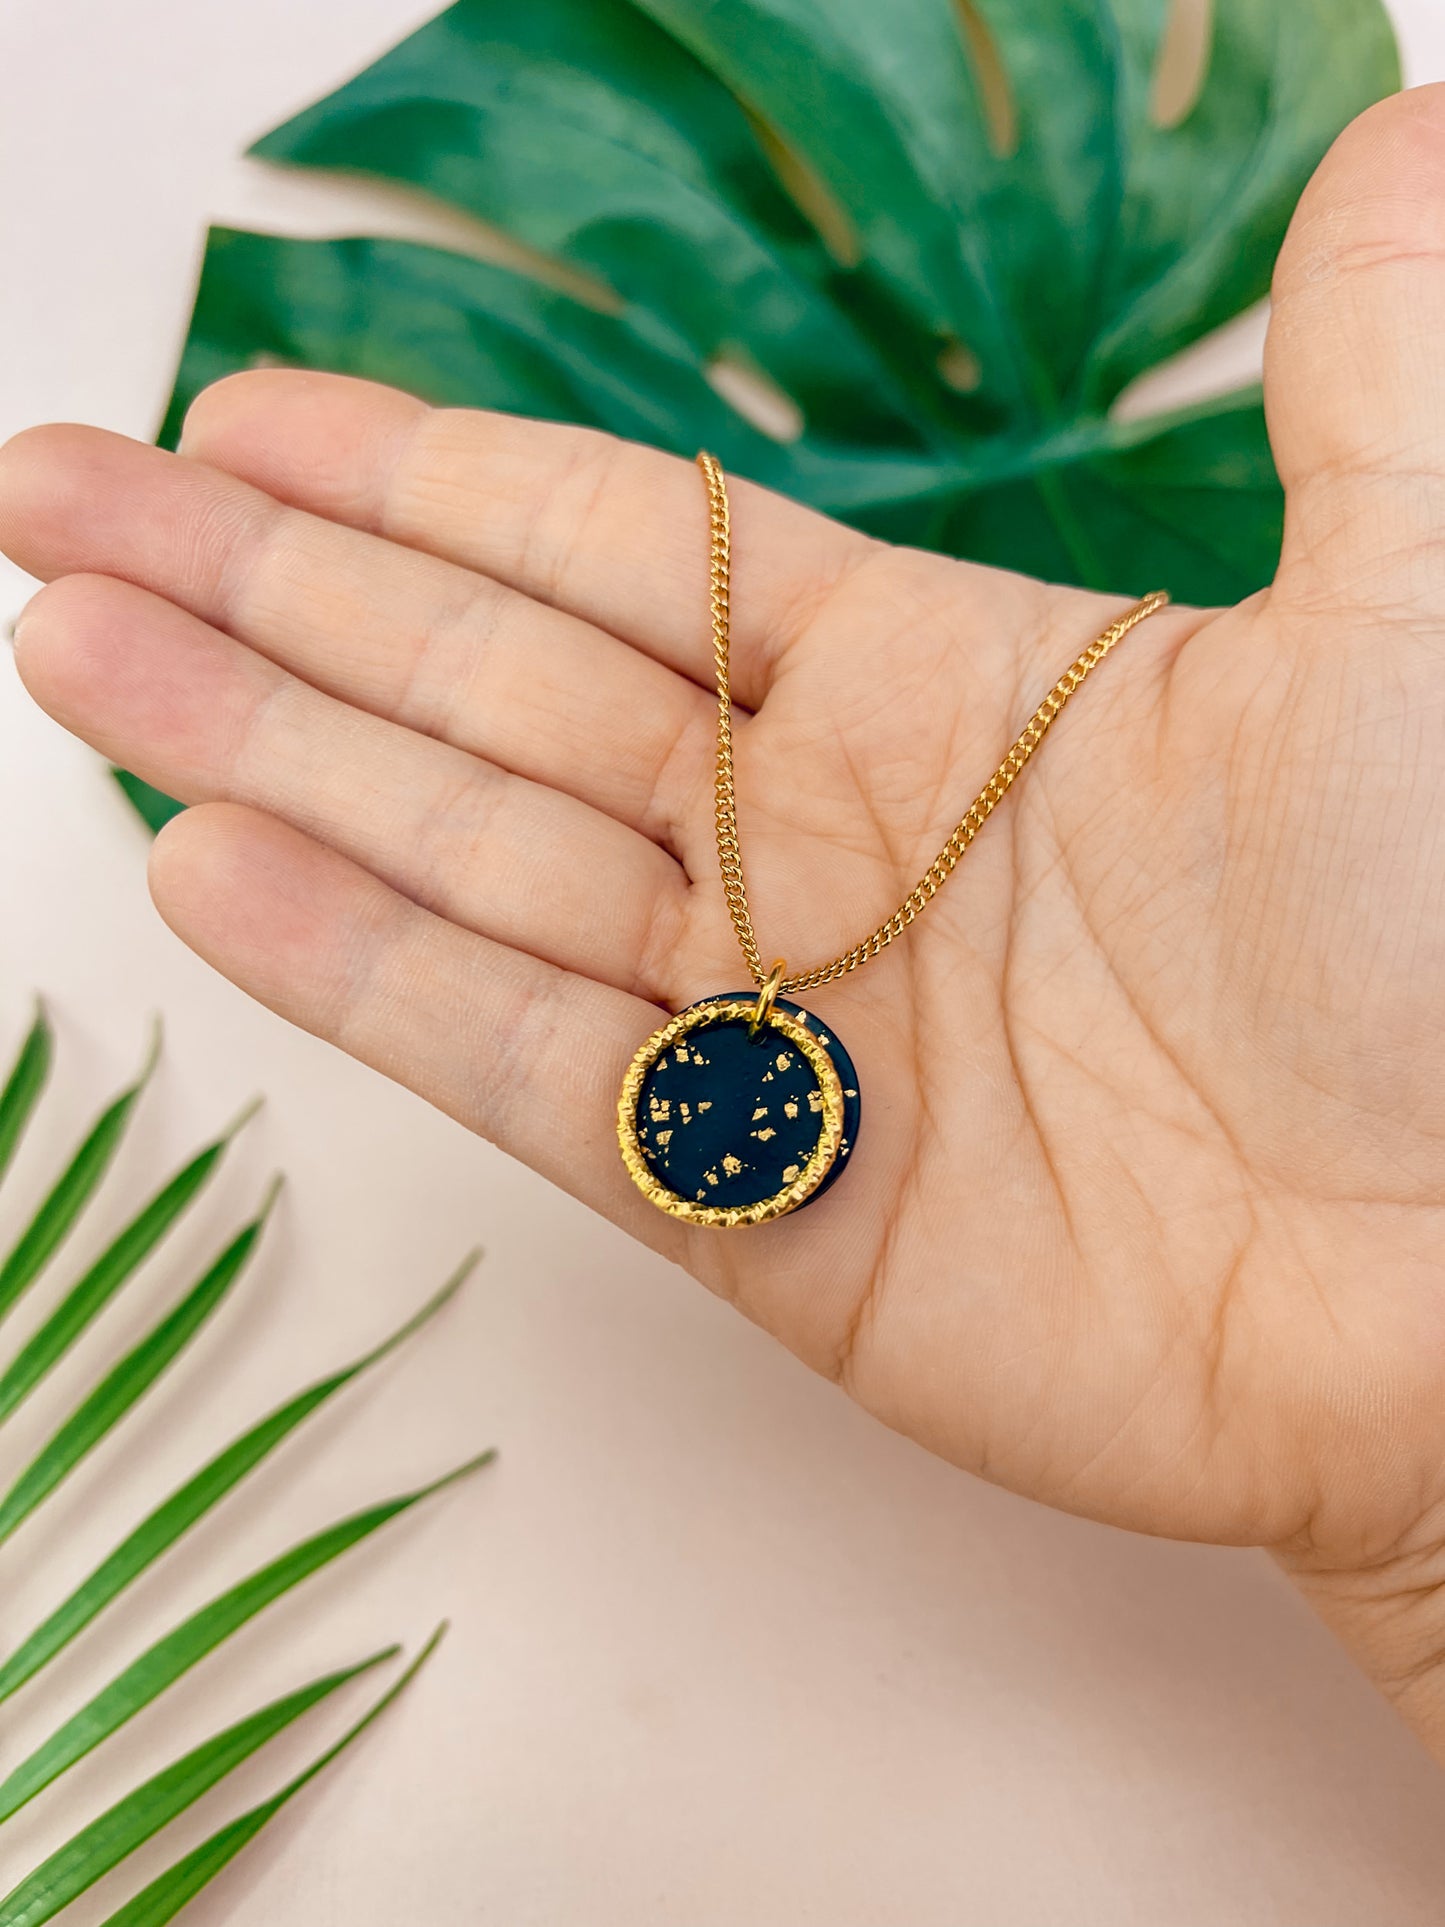 LUCIA - Black & Gold Leaf Small Circle Pendant on Short 18k Gold Chain.